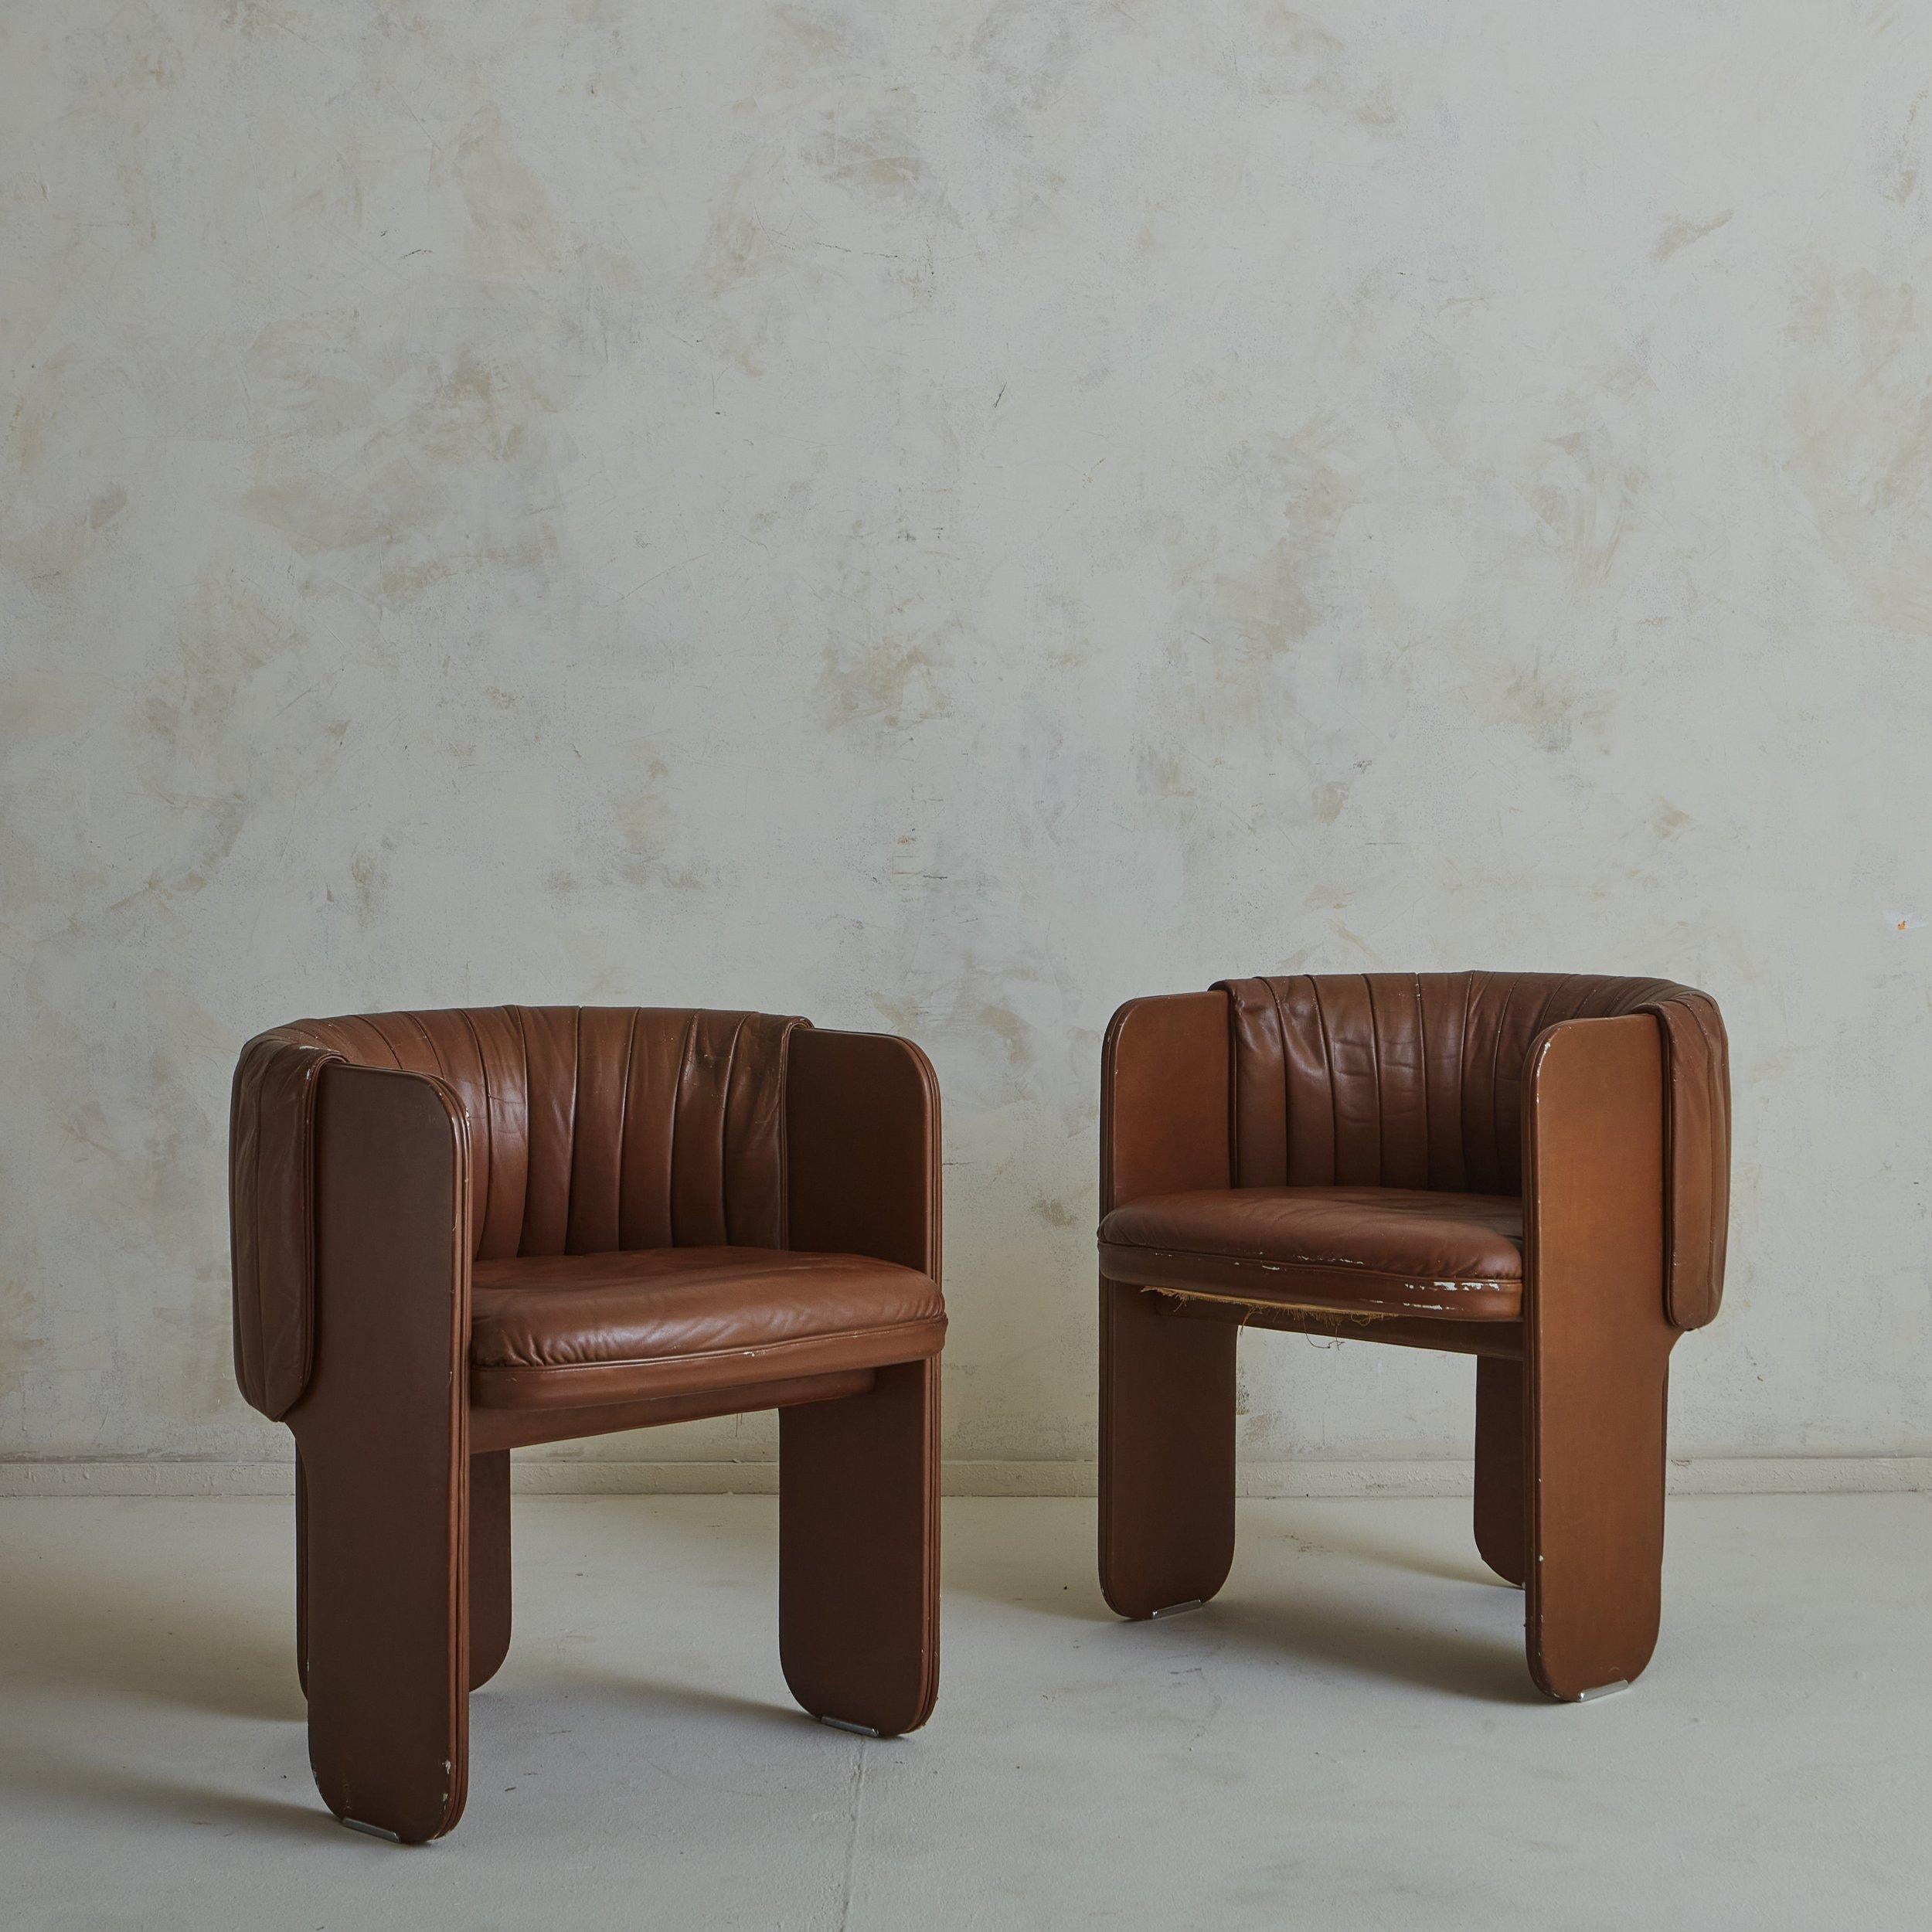 A pair of vegan leather accent chairs by Luigi Massoni for Poltrona Frau, Italy 1980s. These rare three-legged chairs feature elegant curvature and make the most of negative space, offering a remarkable perspective from every angle. We love the